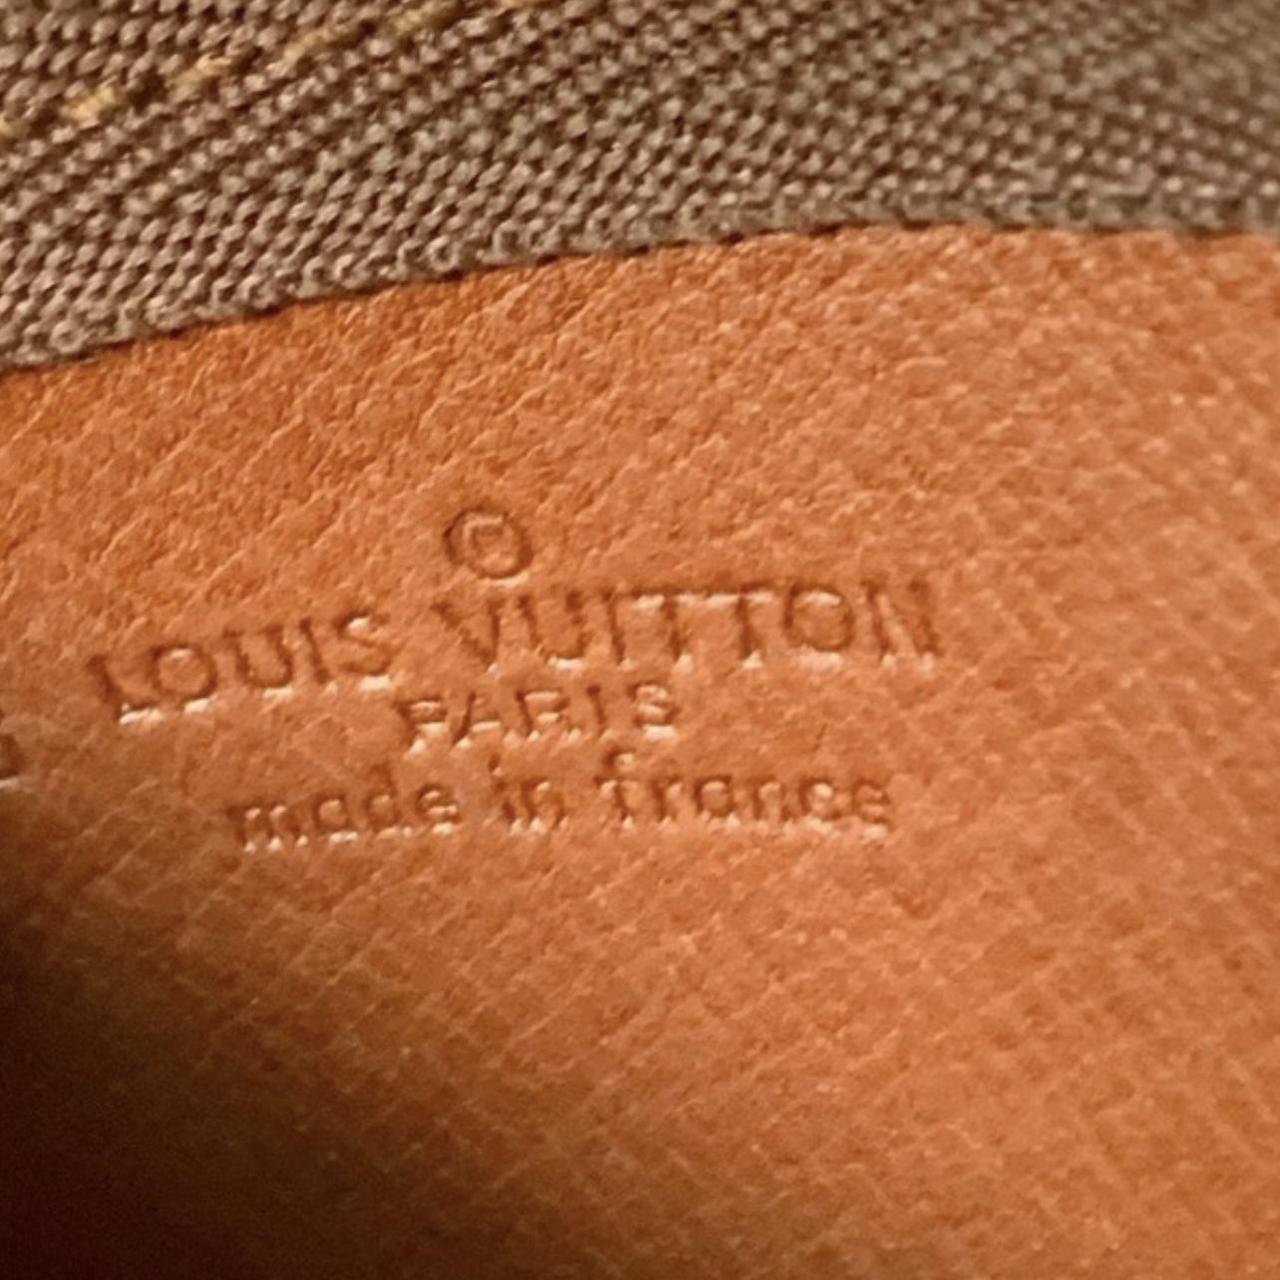 Louis Vuitton Brown Key Pouch! Used like 2 times!  - Depop